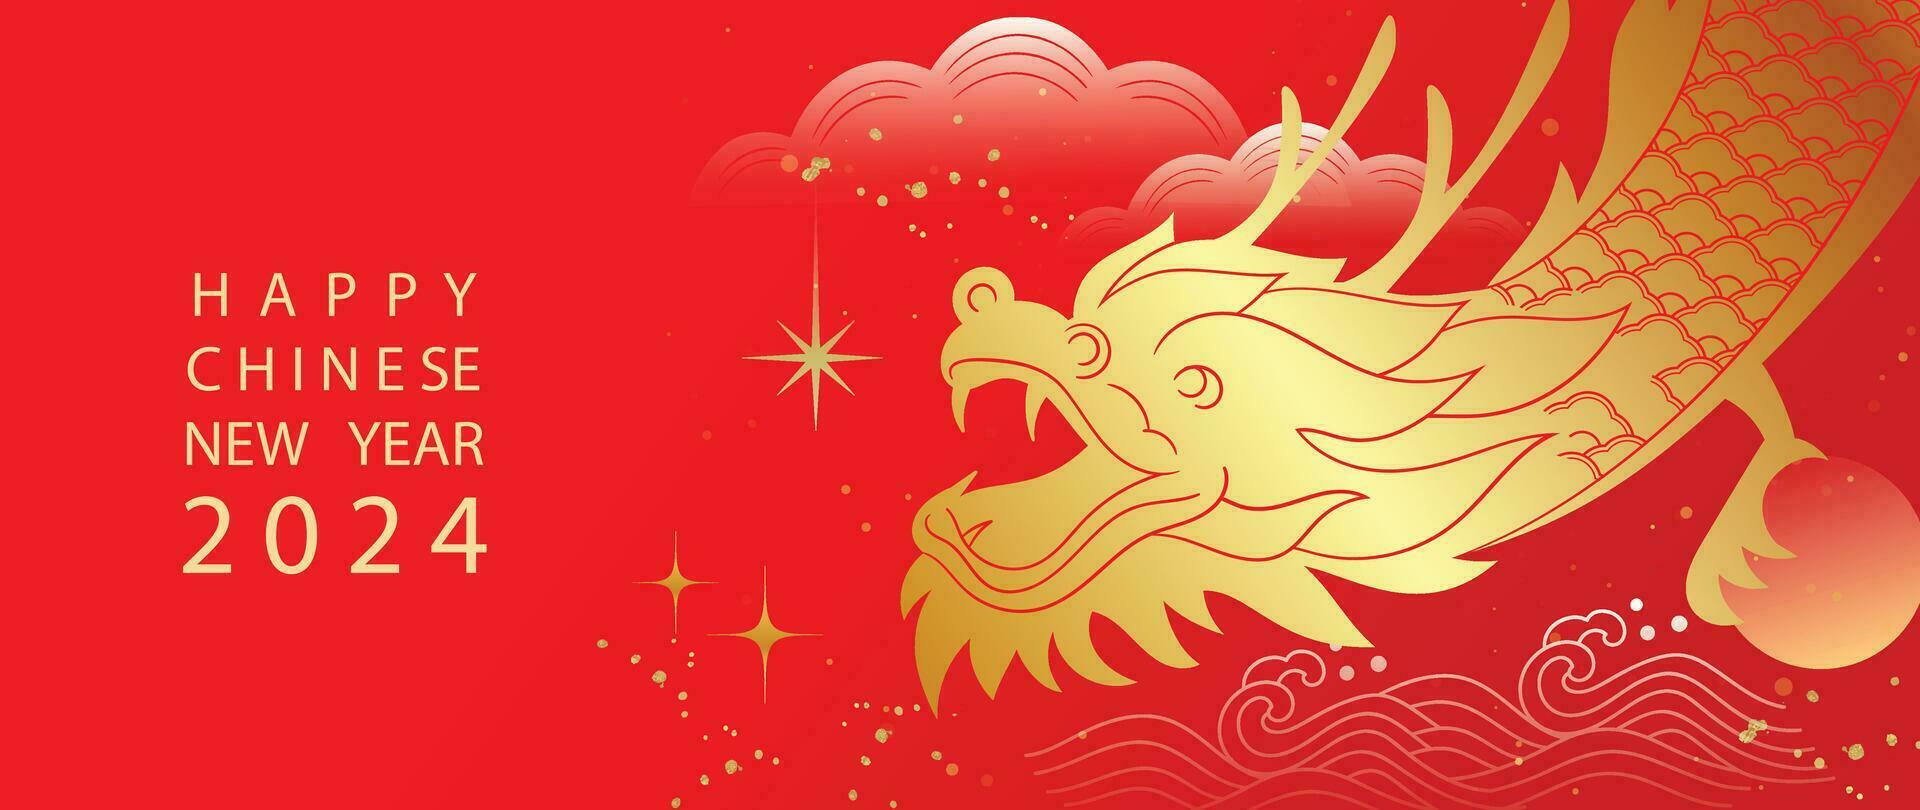 Happy Chinese new year background vector. Year of the dragon design wallpaper with dragon, sea wave, cloud, moon, glitter. Modern luxury oriental illustration for cover, banner, website, decor. vector